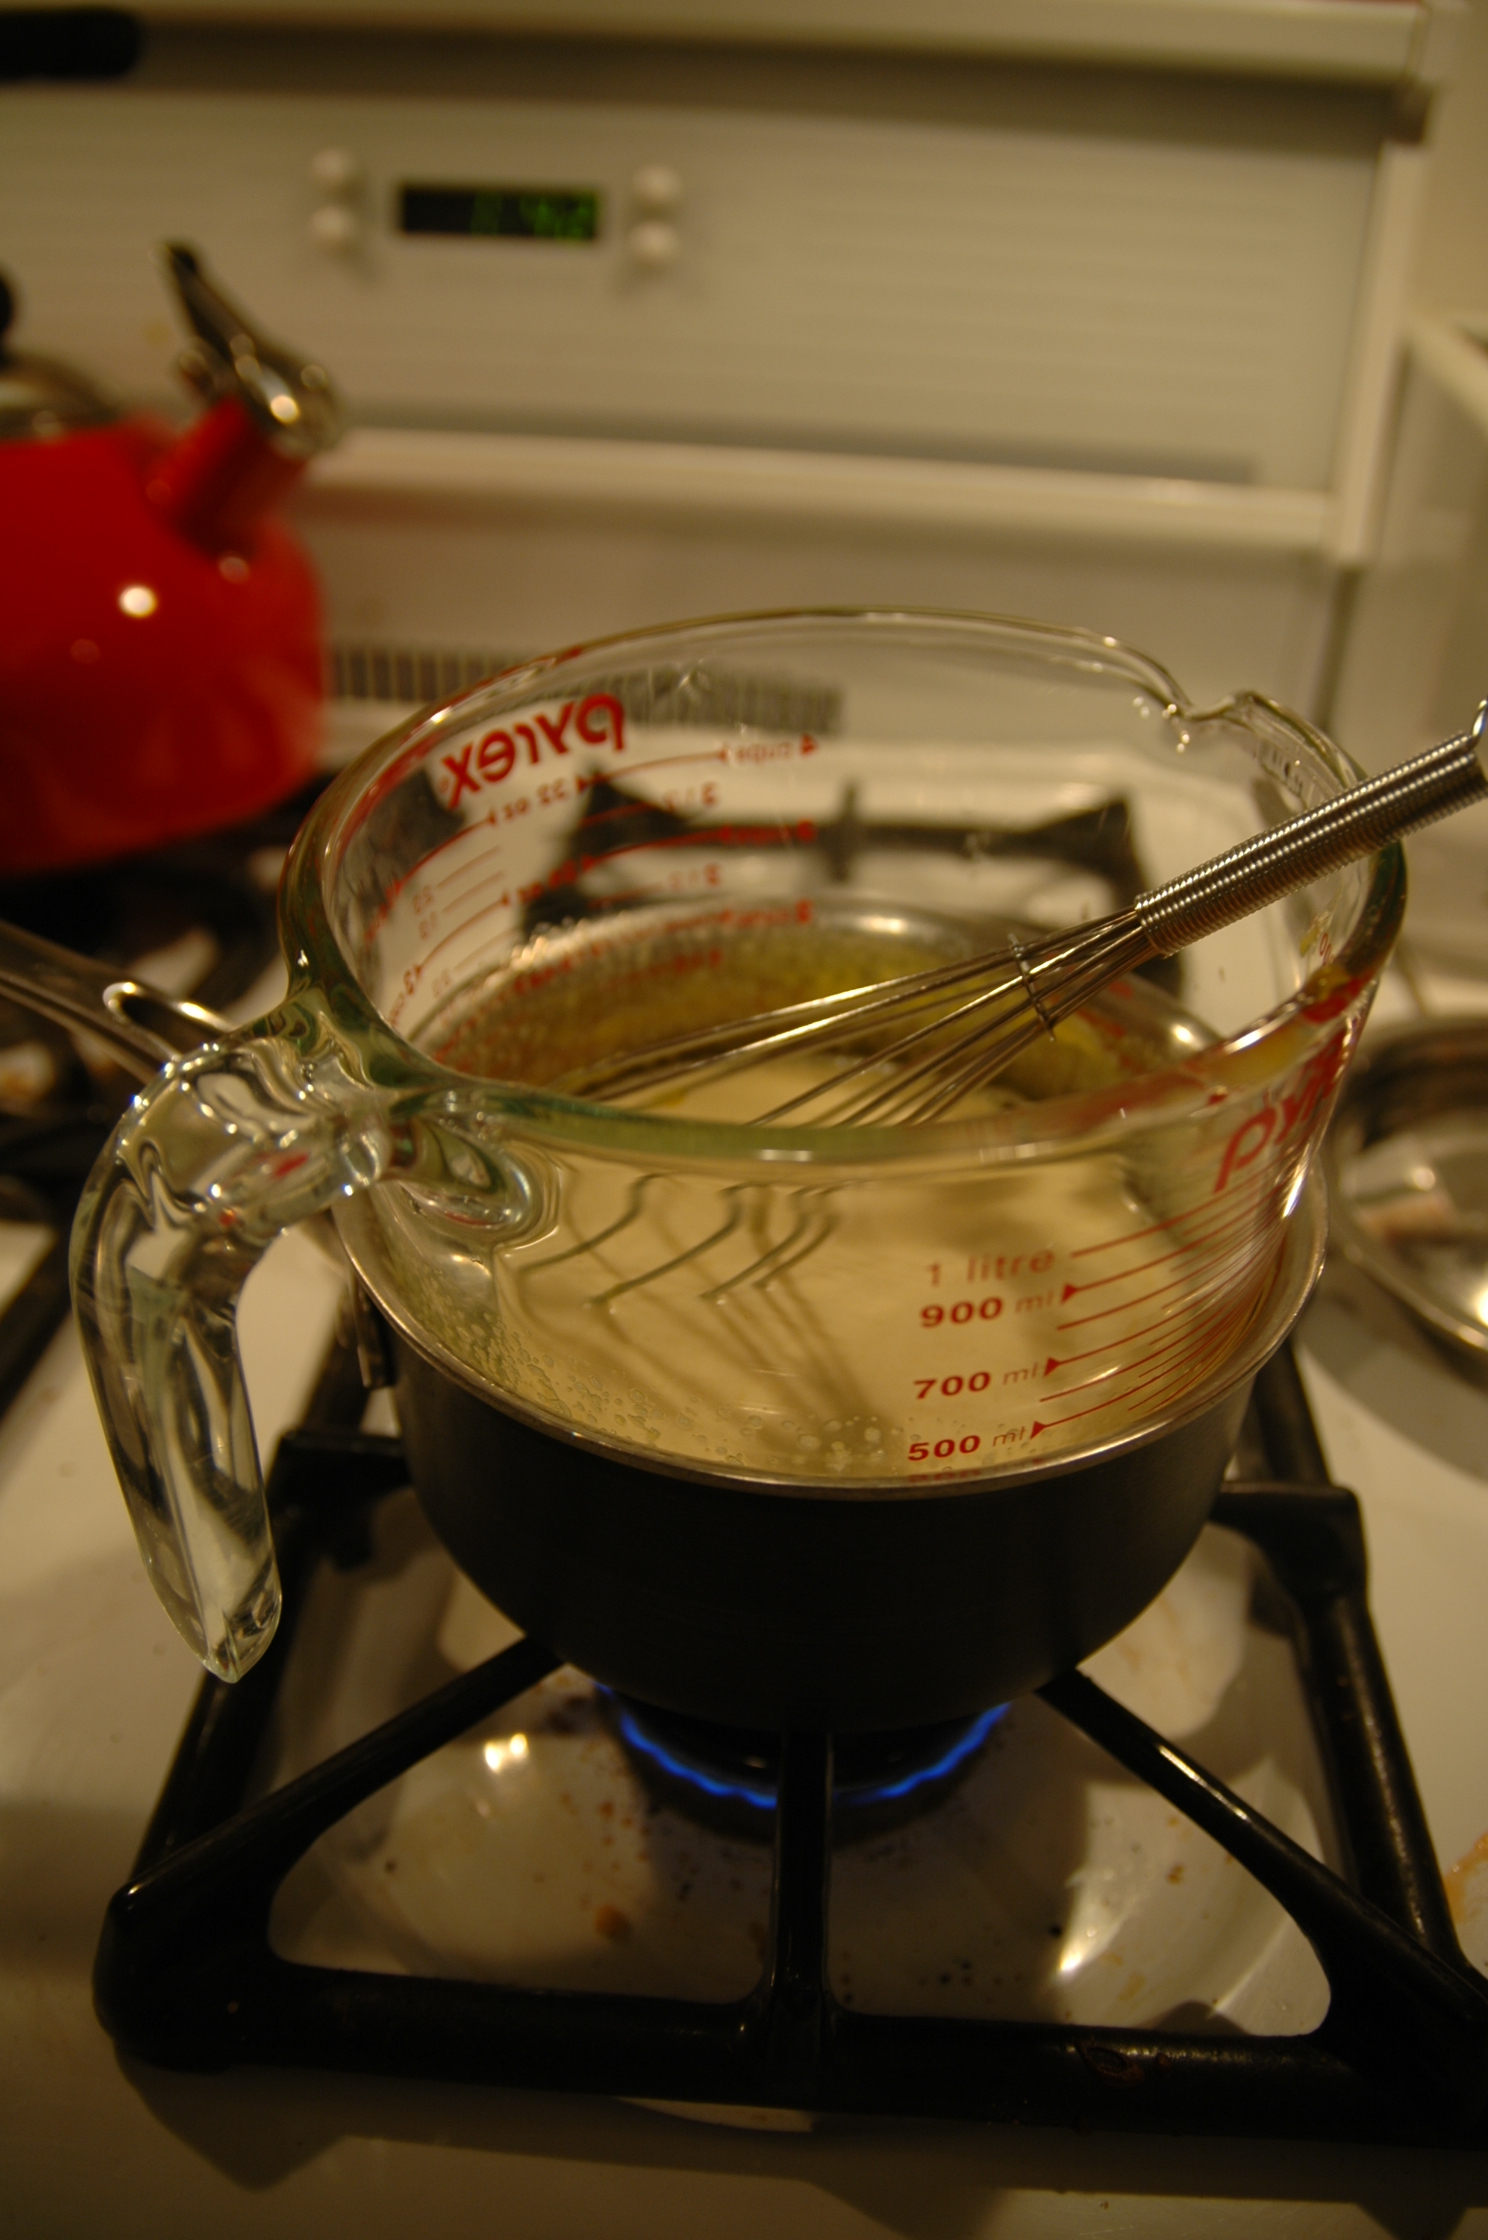 Double Boiler: Measuring Cup + Saucepan=Makeshift and workable